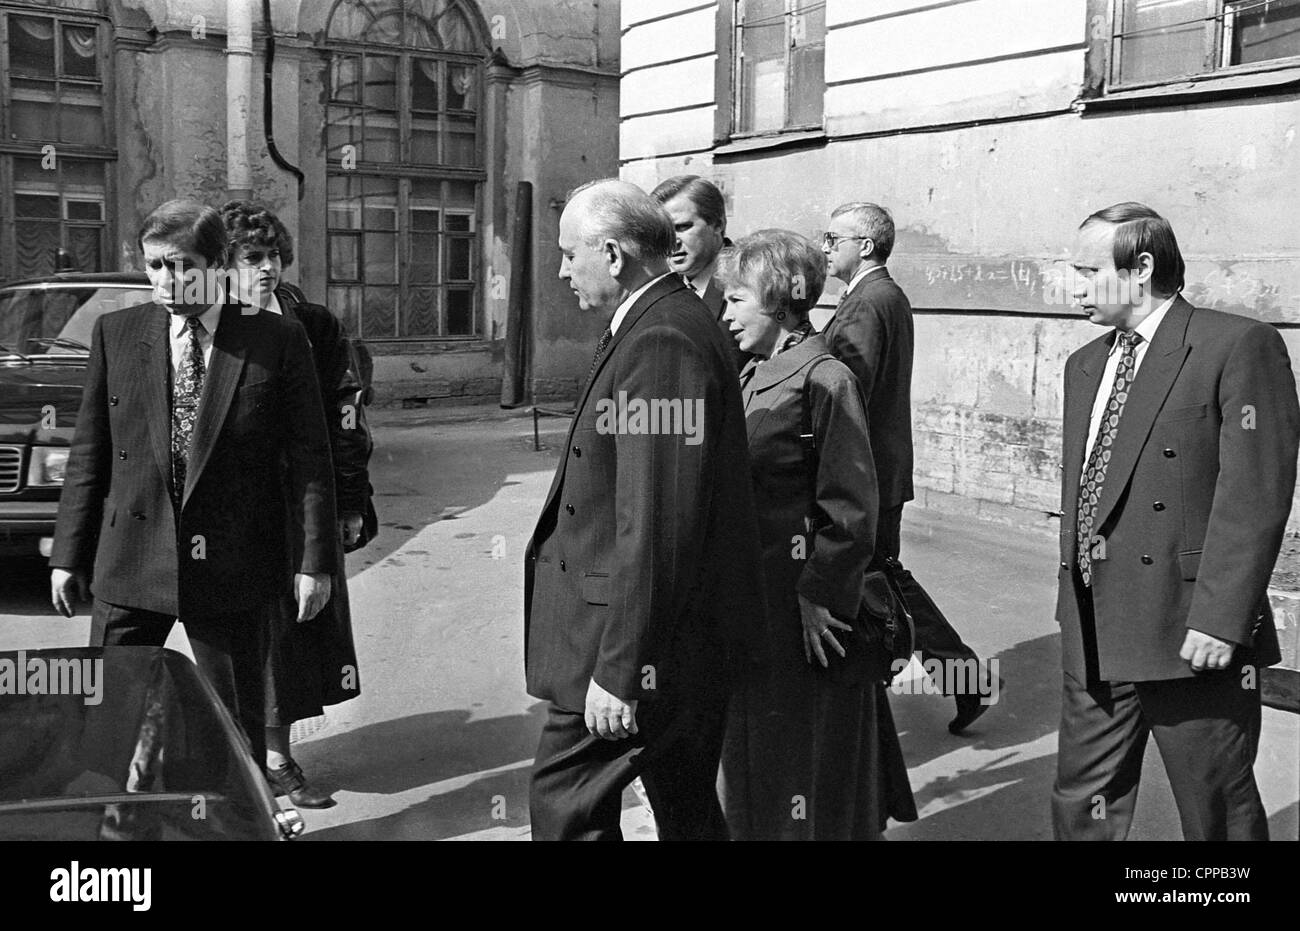 May 10, 1994 - St. Petersburg, Russia - May 10,1994.First USSR president Mikhail Gorbachev with his spouse Raisa Gorbacheva when visiting St.Petersbyrg,Russia. Vladimir Putin, the chairman of the city's Foreign Relations Committee is pictured right. (Credit Image: © PhotoXpress/ZUMAPRESS.com) Stock Photo